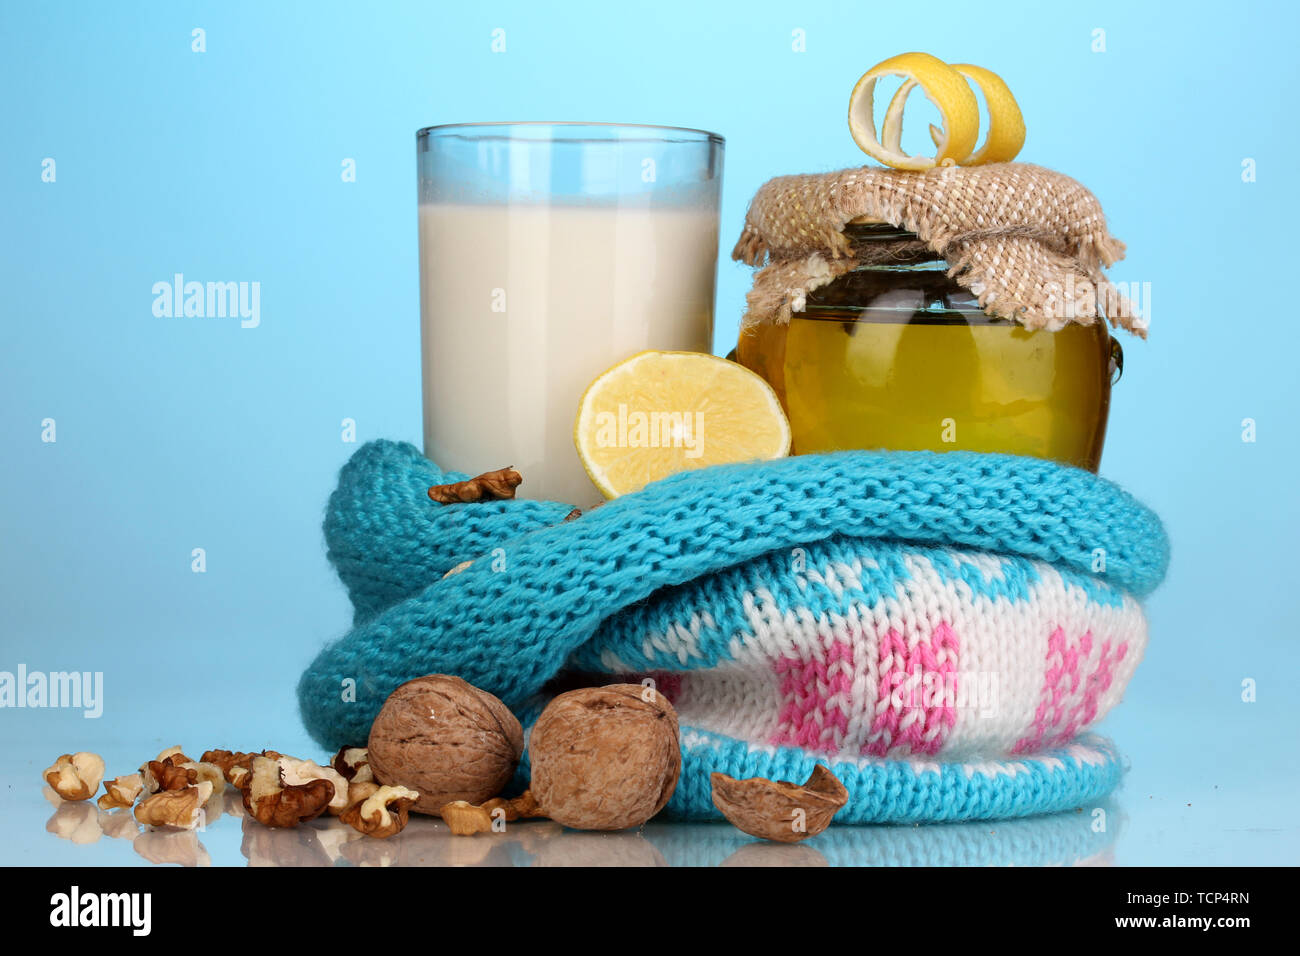 Healthy ingredients for strengthening immunity on blue background Stock Photo